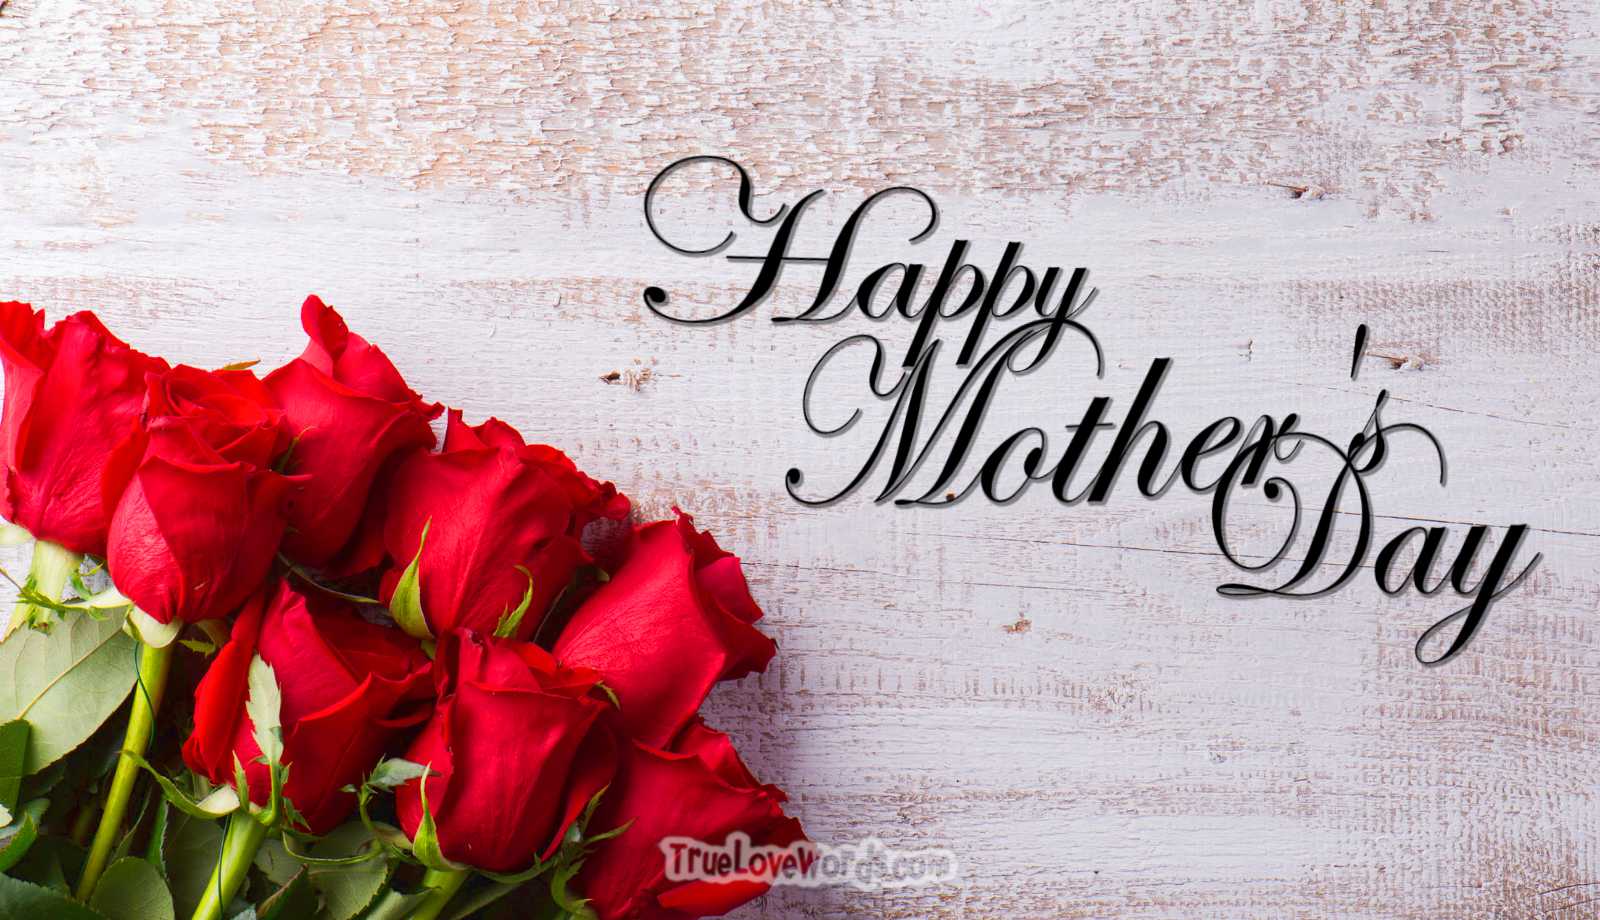 60 Mother's Day Messages Inspiring, Heartfelt and Funny